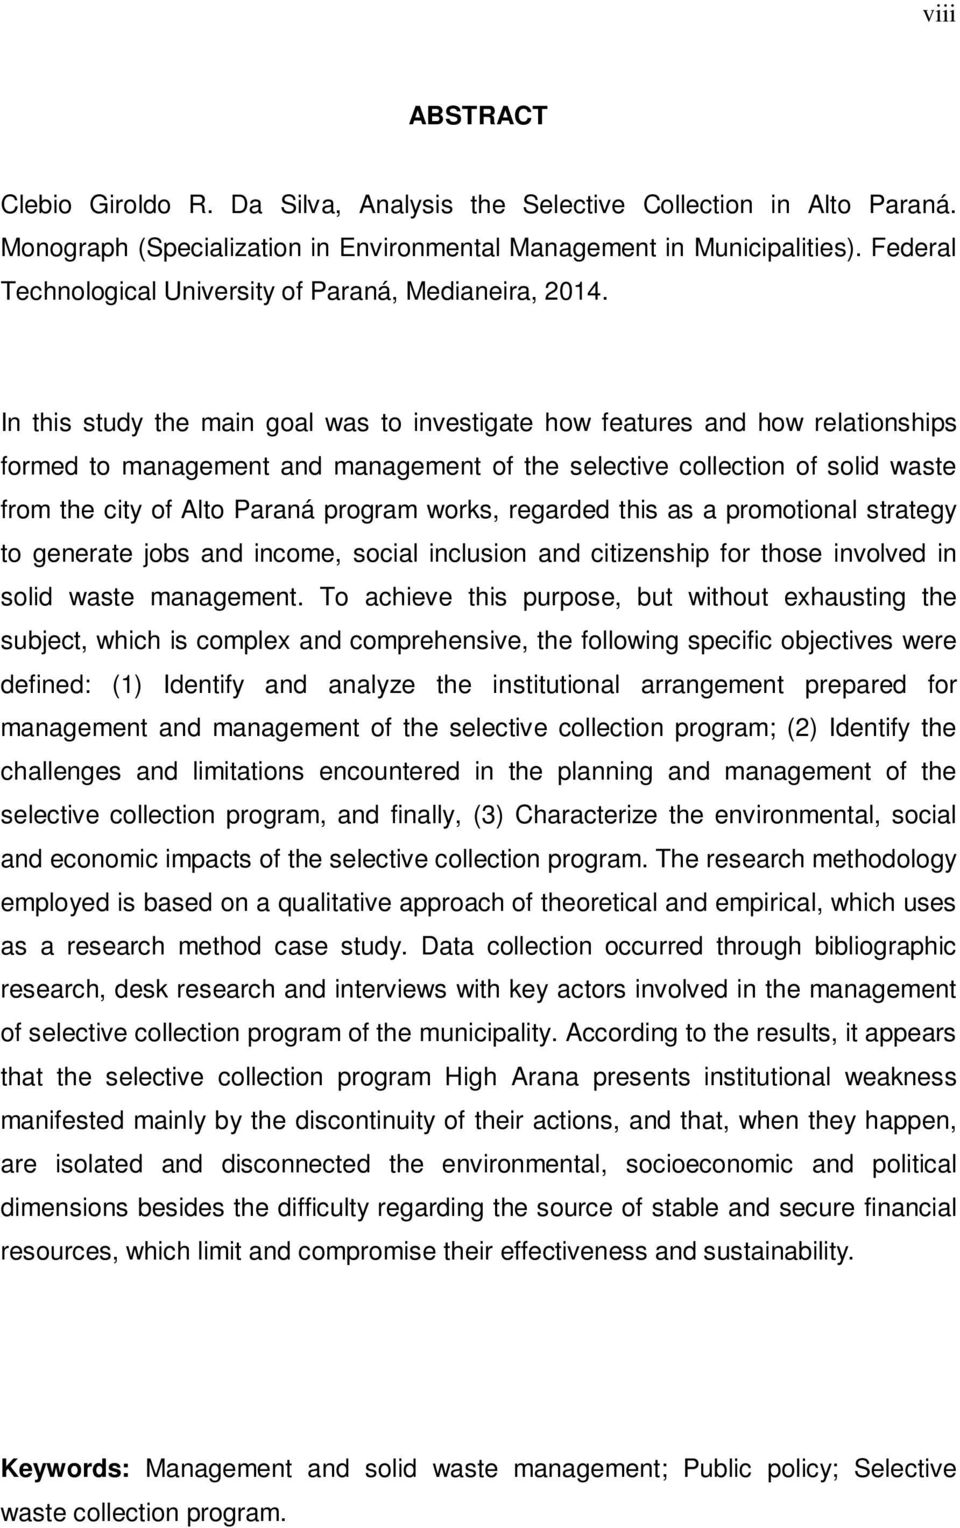 In this study the main goal was to investigate how features and how relationships formed to management and management of the selective collection of solid waste from the city of Alto Paraná program